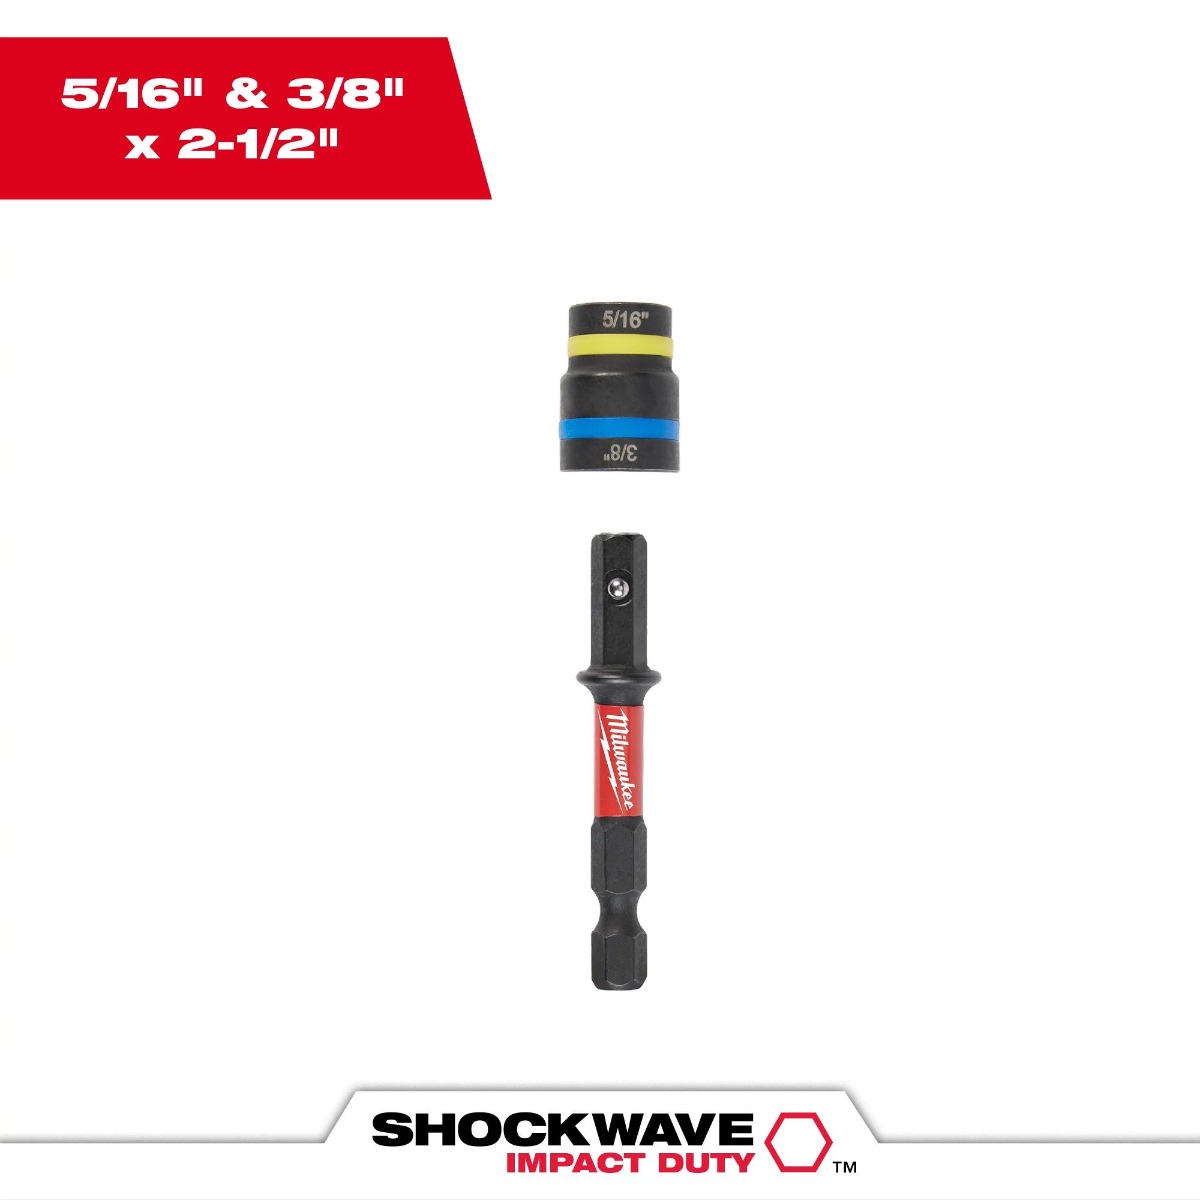 SHOCKWAVE Impact Duty™ 5/16" and 3/8" x 2-1/2" QUIK-CLEAR™ 2-in-1 Magnetic Nut Driver BULK 25